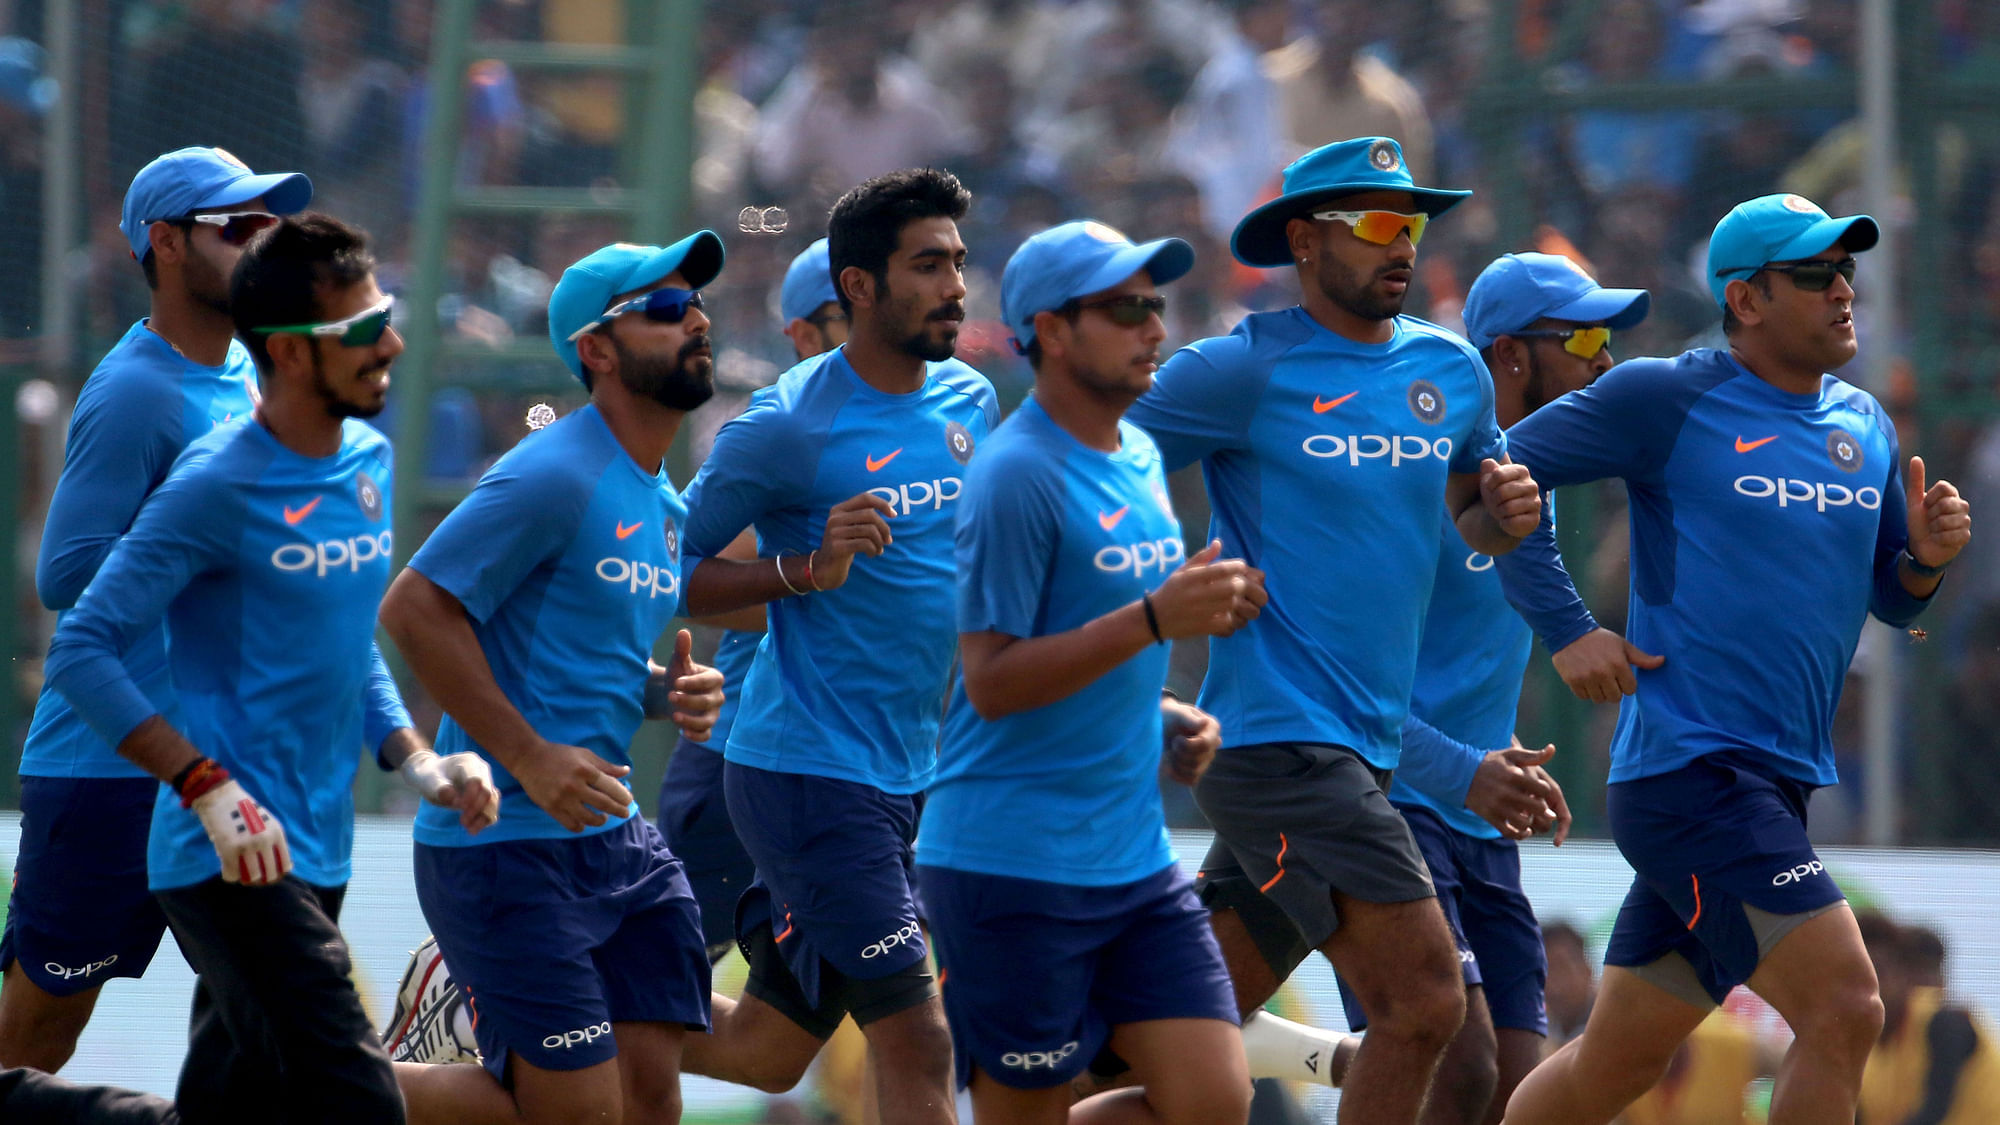 Indian cricketers are now undergoing a DNA test that reveals their genetic fitness blueprint.